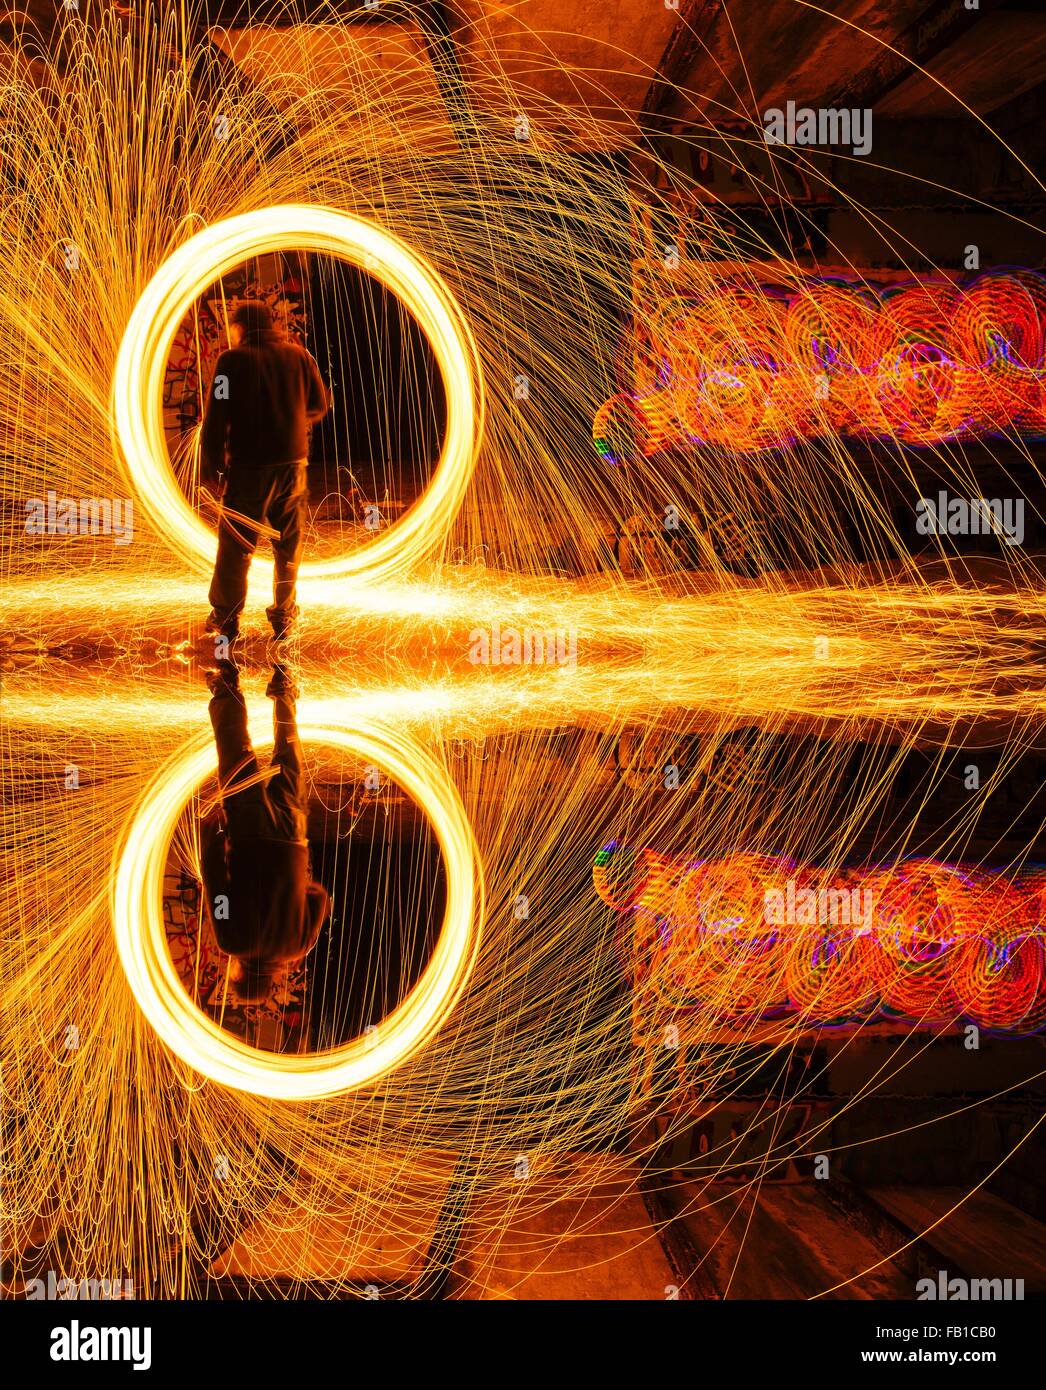 Mirror image of man creating circular golden spark light trails in derelict building Stock Photo